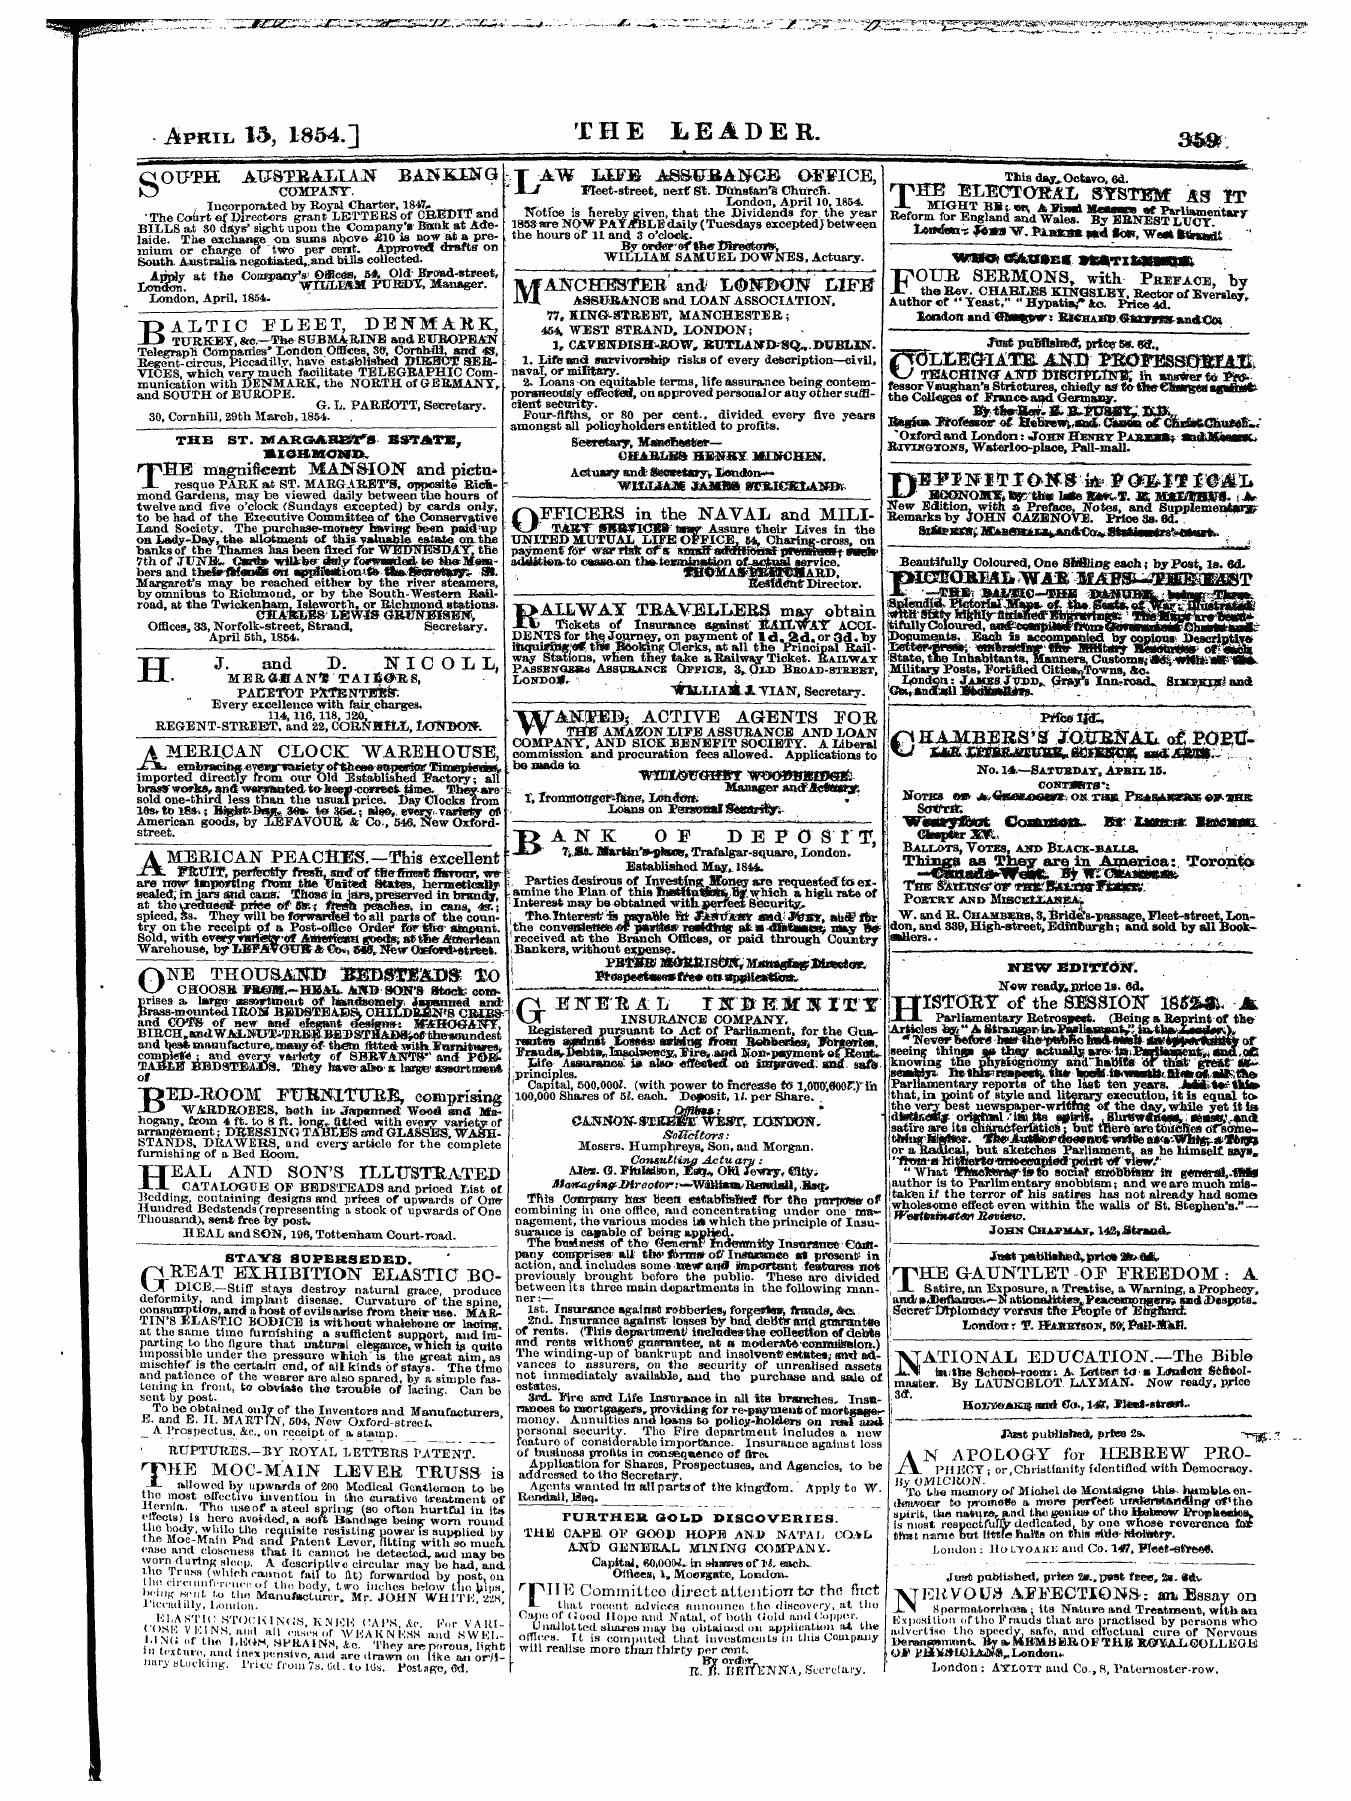 Leader (1850-1860): jS F Y, 1st edition - Untitled Ad